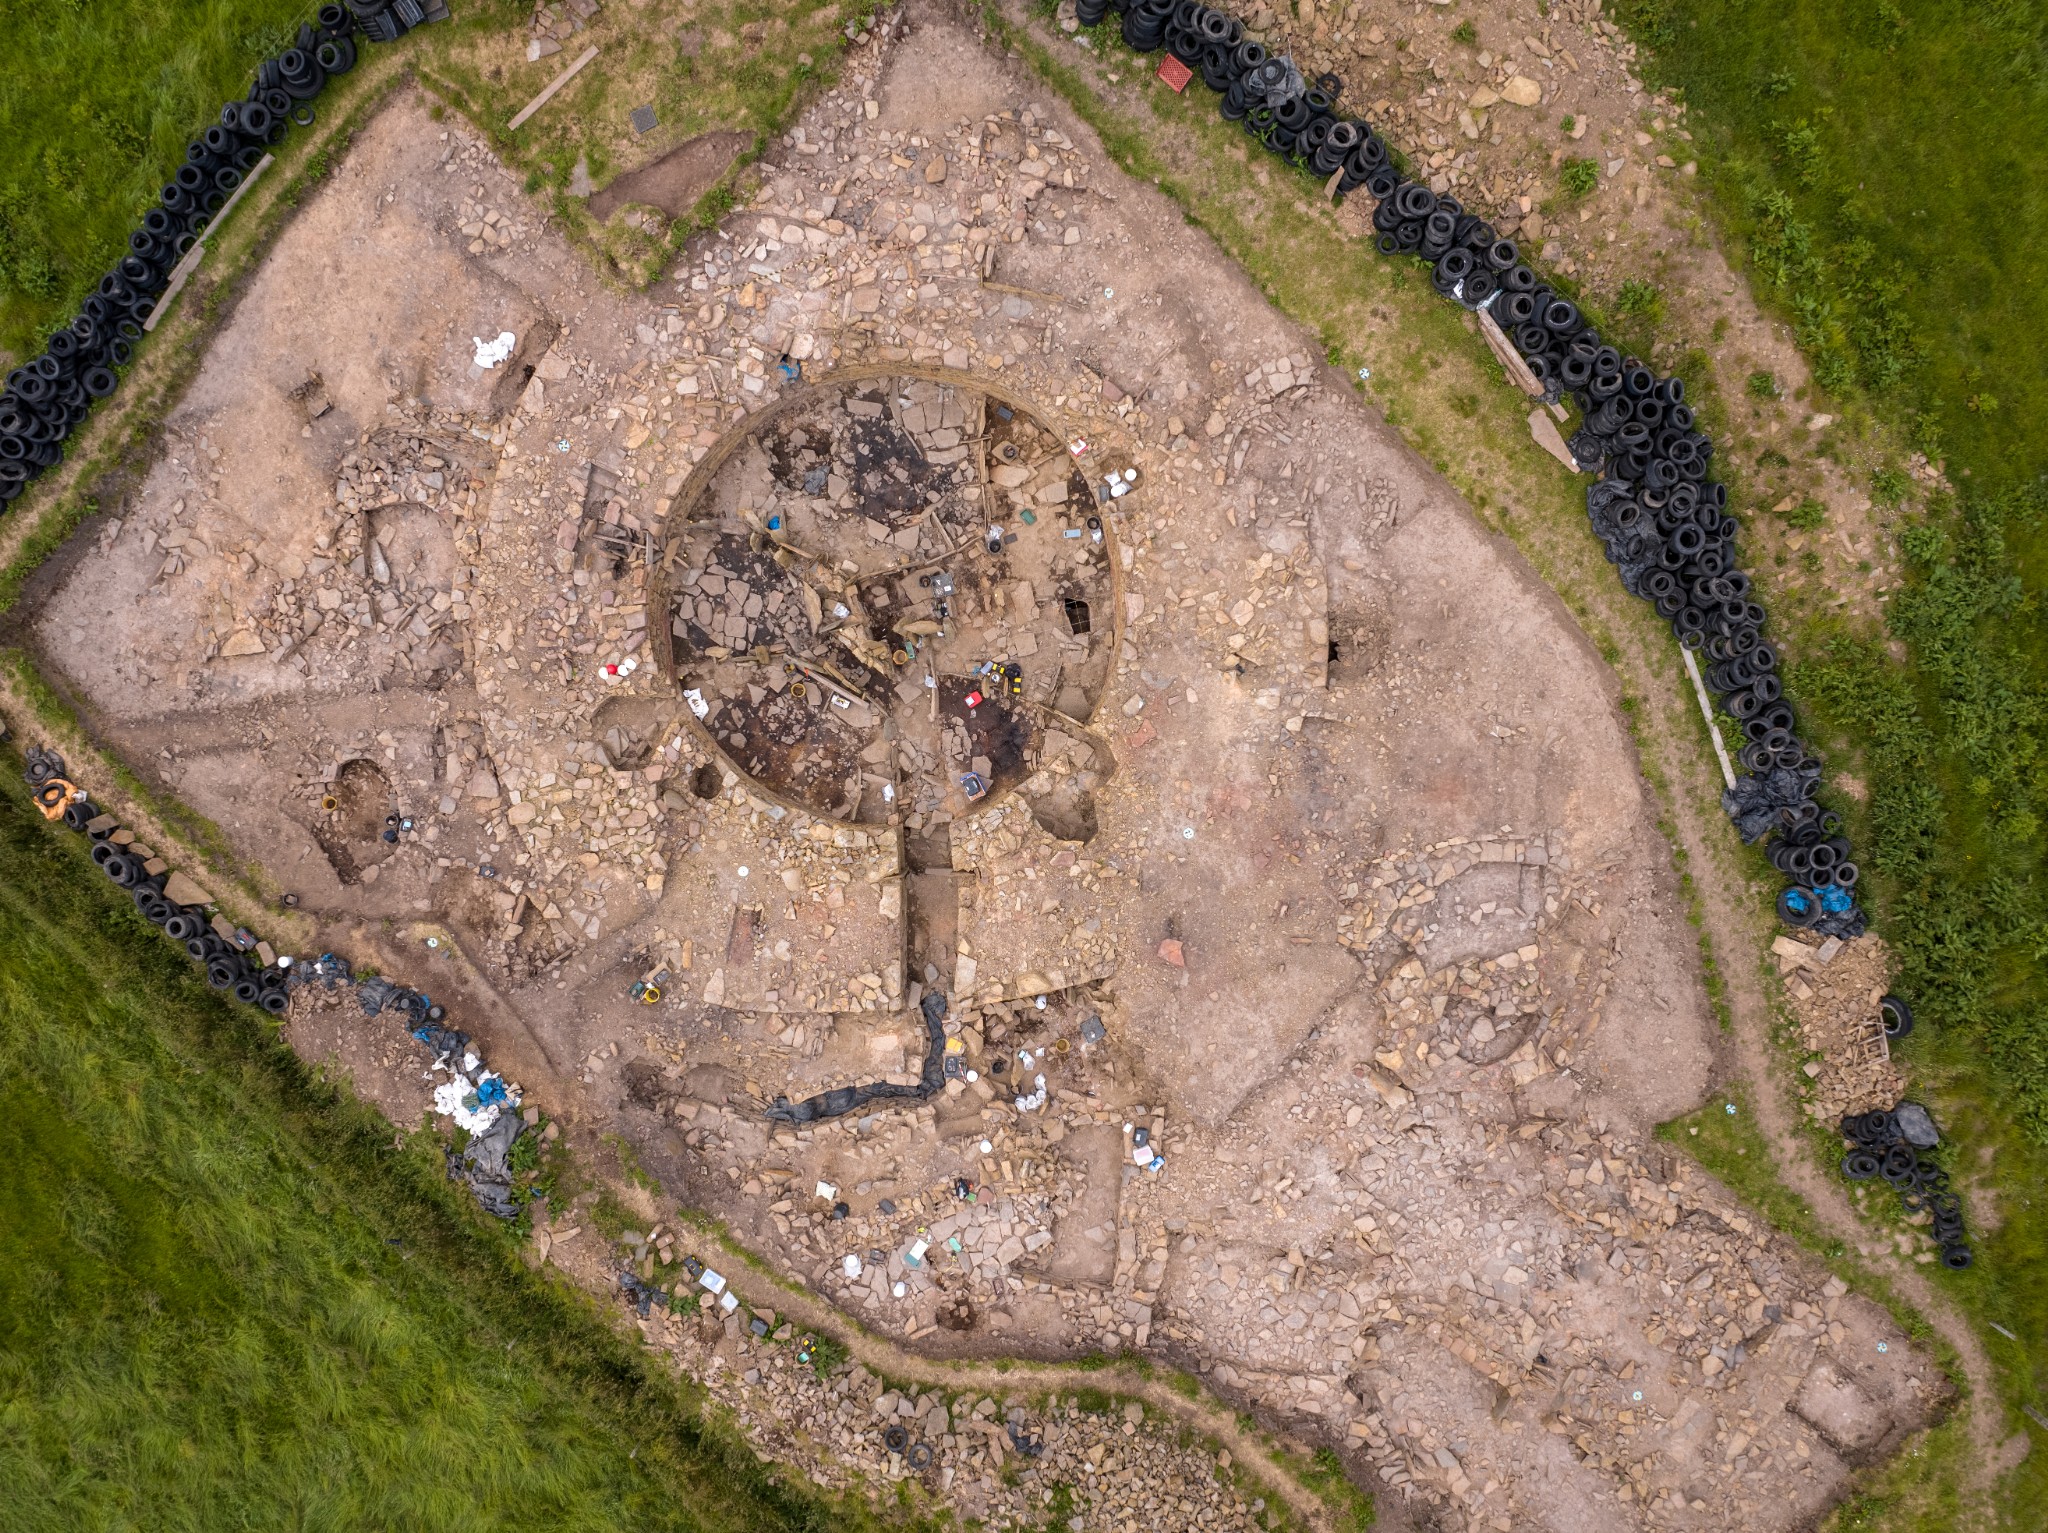 Looking down on The Cairns excavation, Orkney